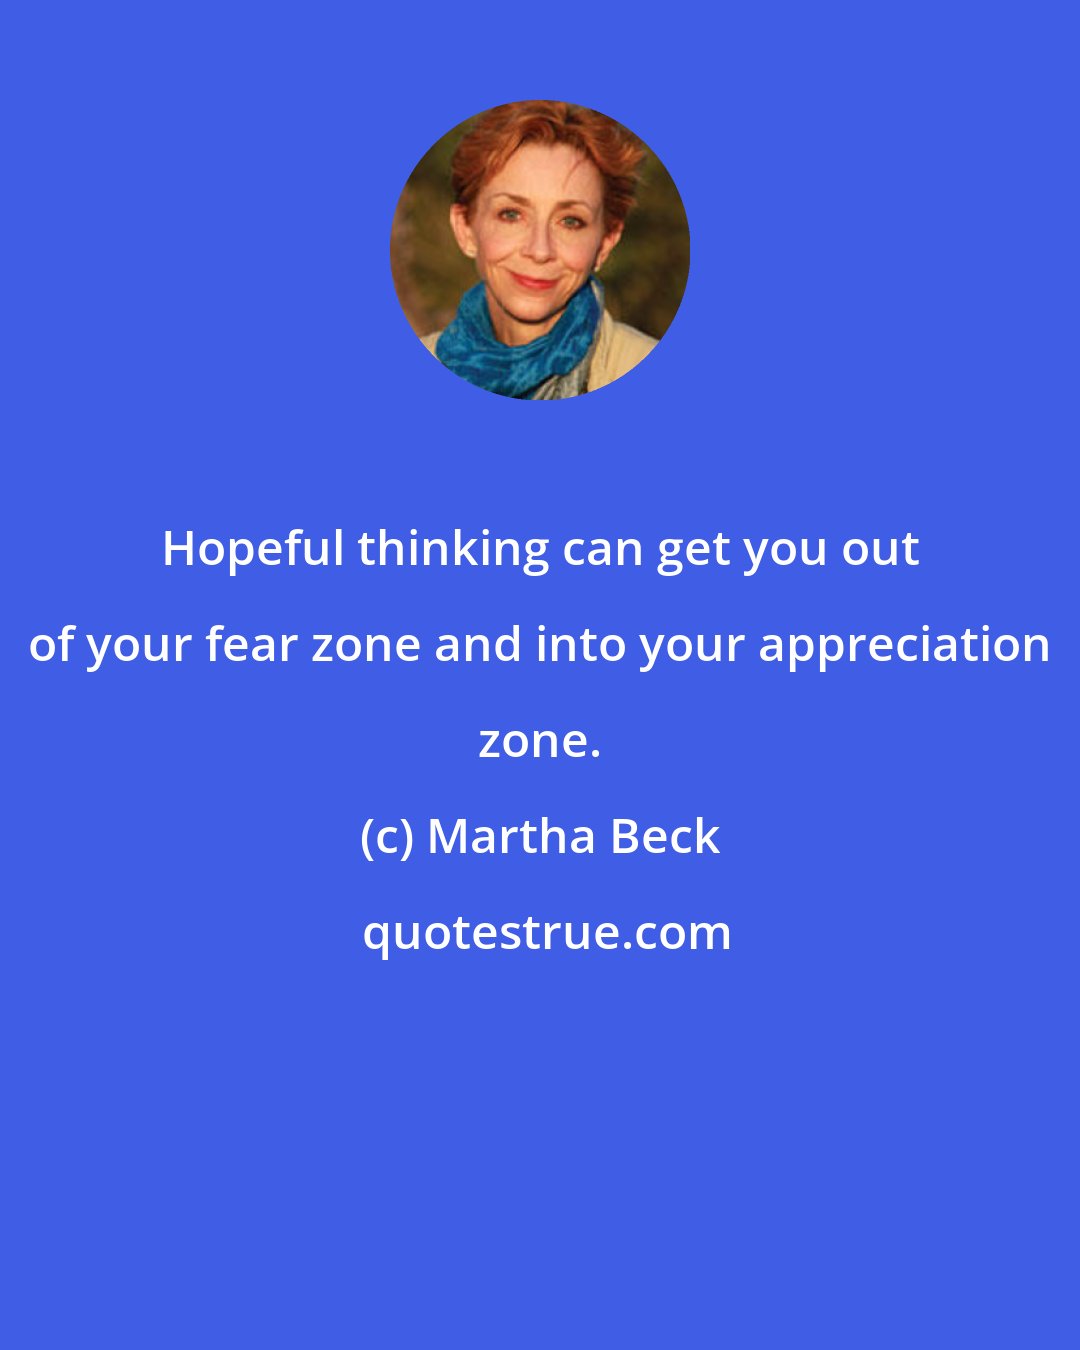 Martha Beck: Hopeful thinking can get you out of your fear zone and into your appreciation zone.